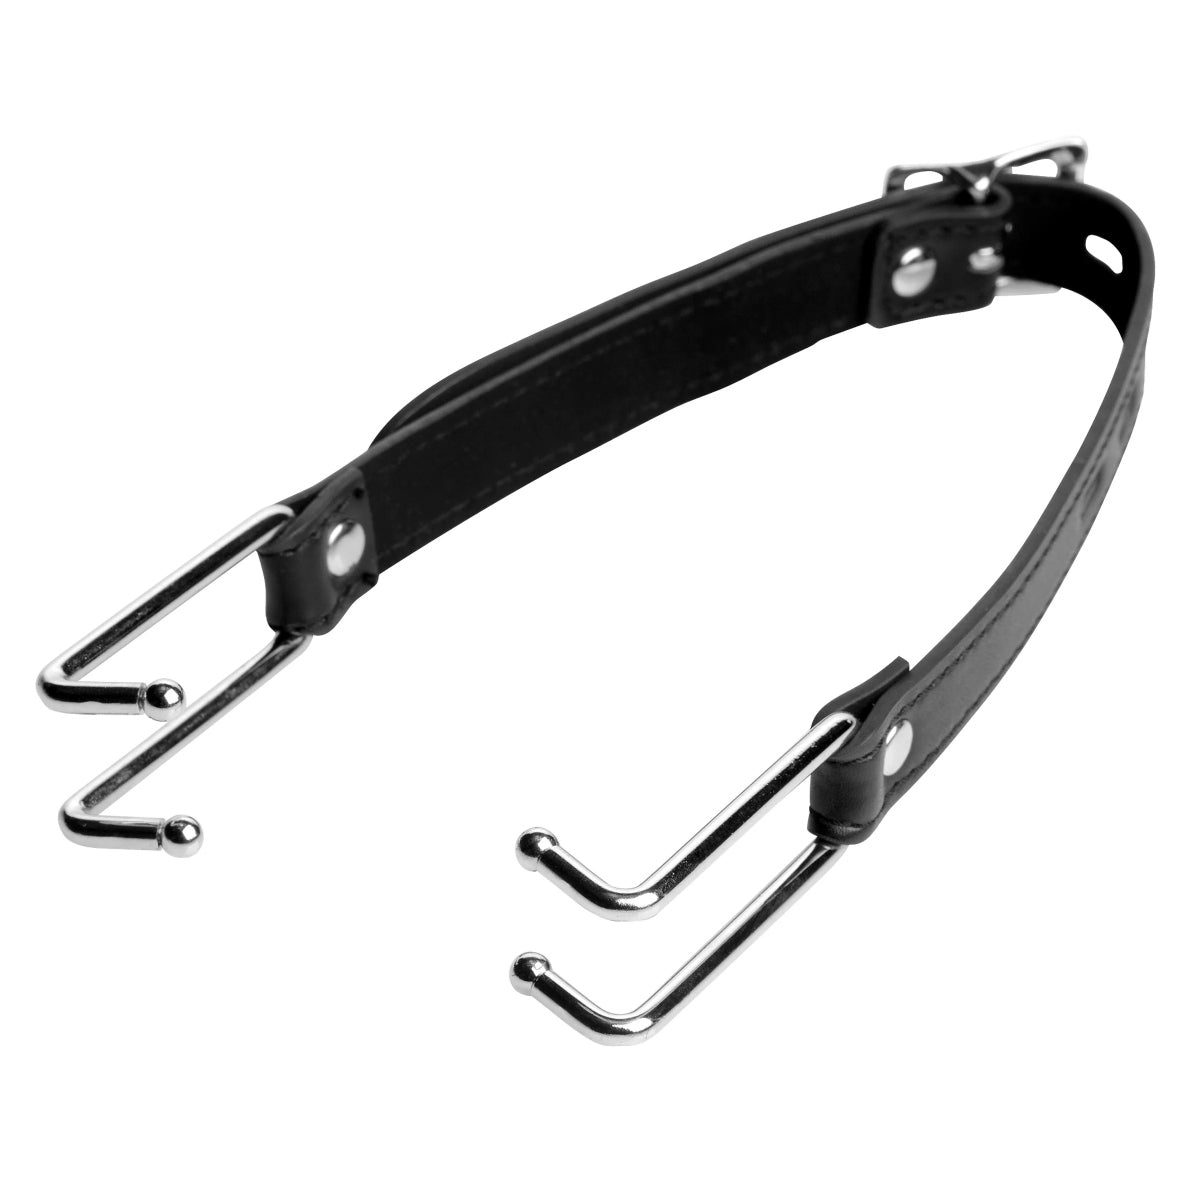 Strict Claw Hook Mouth Spreader Black Silver